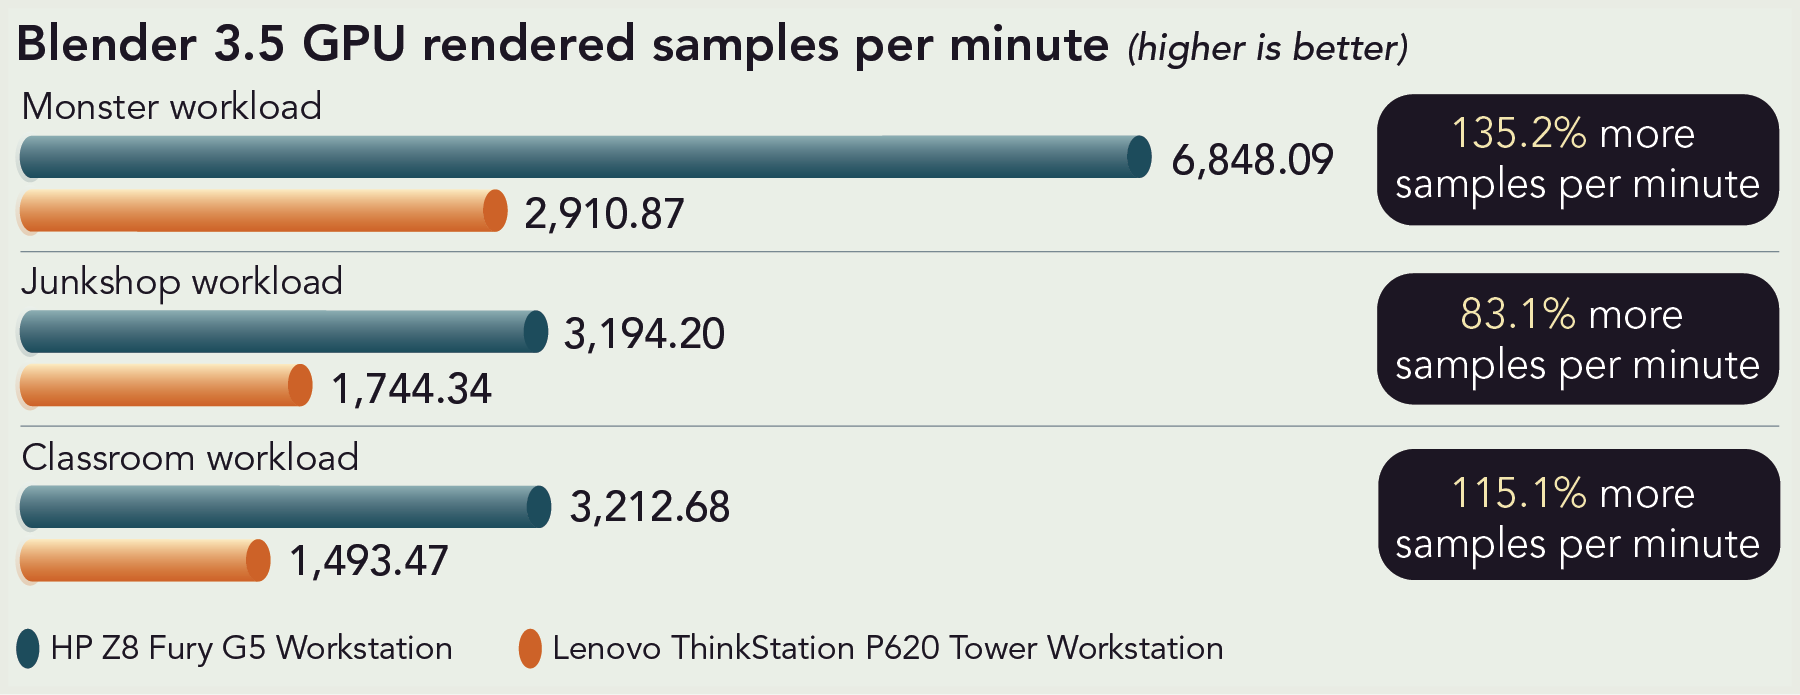 Chart of Blender 3.5 GPU rendered samples per minute. Higher is better. For the Monster workload, HP Z8 Fury G5 Workstation is 6,848.09 samples per minute and Lenovo ThinkStation P620 Tower Workstation is 2,910.87 samples per minute; 135.2 percent more samples per minute. For the Junkshop workload, HP Z8 Fury G5 Workstation is 3,194.10 samples per minute and Lenovo ThinkStation P620 Tower Workstation is 1,744.34 samples per minute; 83.1 percent more samples per minute. For the Classroom workload, HP Z8 Fury G5 Workstation is 3,212.68 samples per minute and Lenovo ThinkStation P620 Tower Workstation is 1,493.47 samples per minute; 115.1 percent more samples per minute.